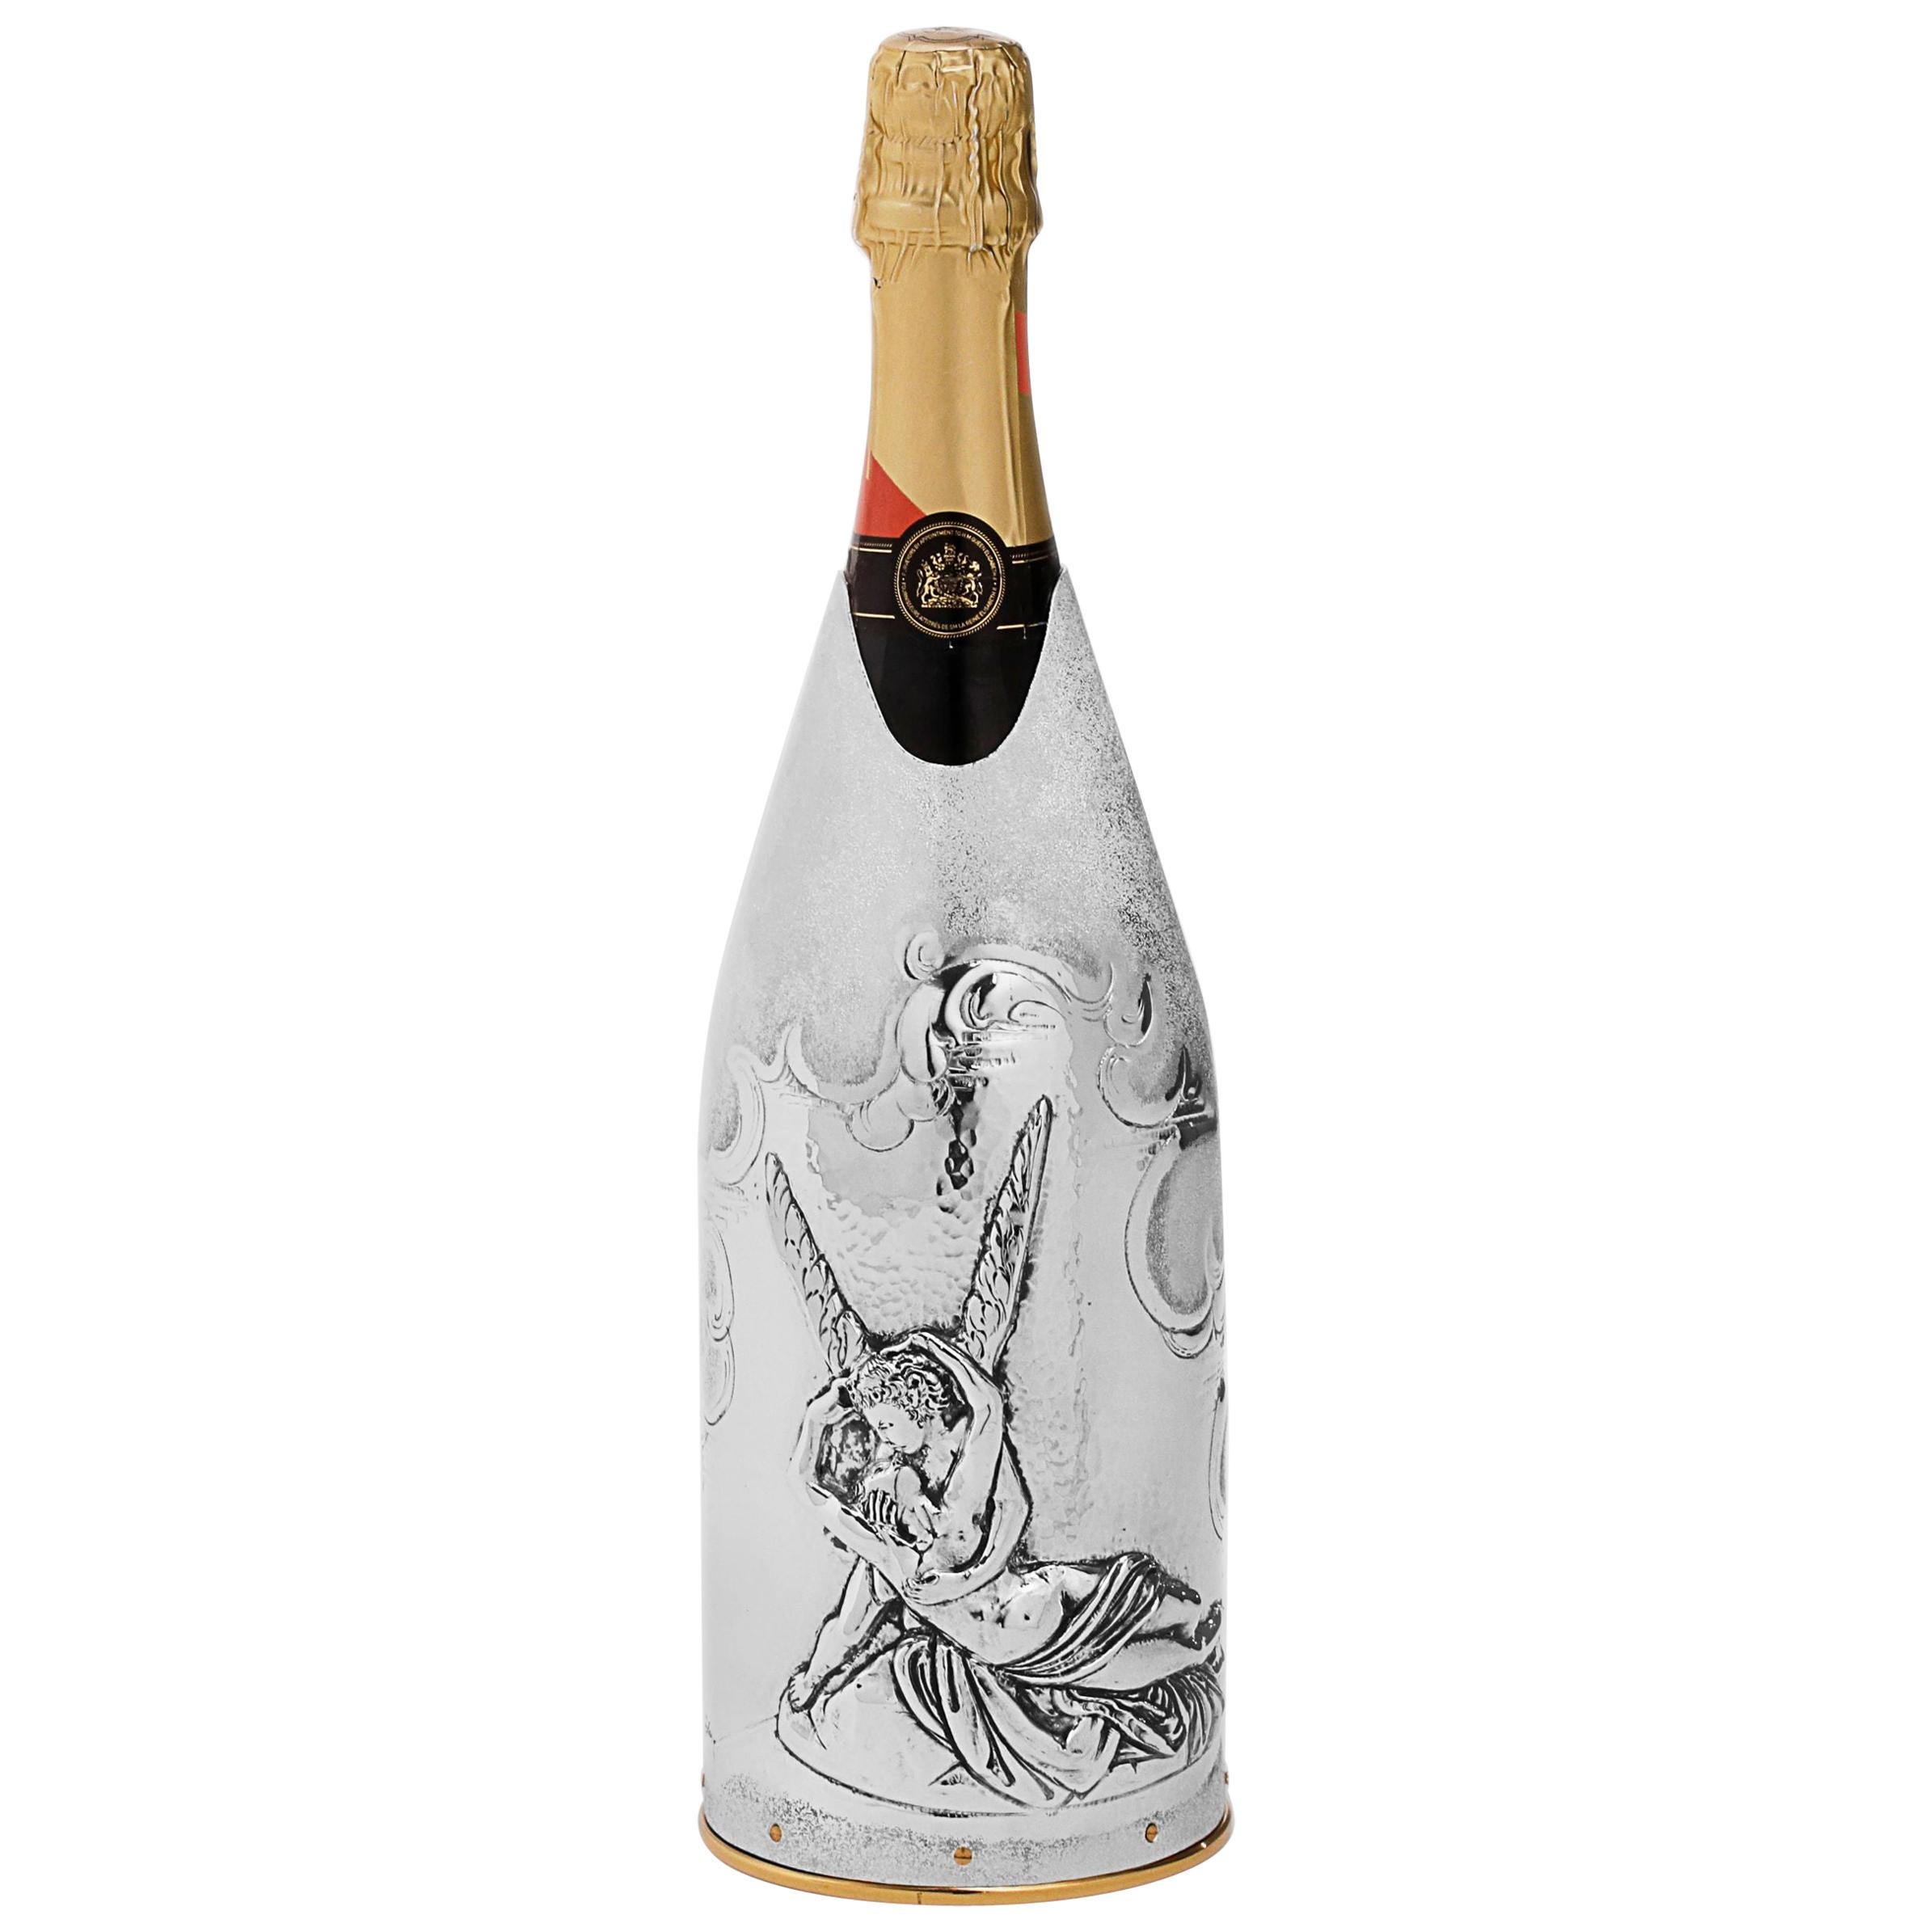 This champagne cover belongs to the collection “K-over Art”. The subject of our pure silver 999/°° K-OVER is “Amore e Psiche”, one of the most famous sculpture of Antonio Canova. The cover was designed to celebrate love. As a matter of fact, the